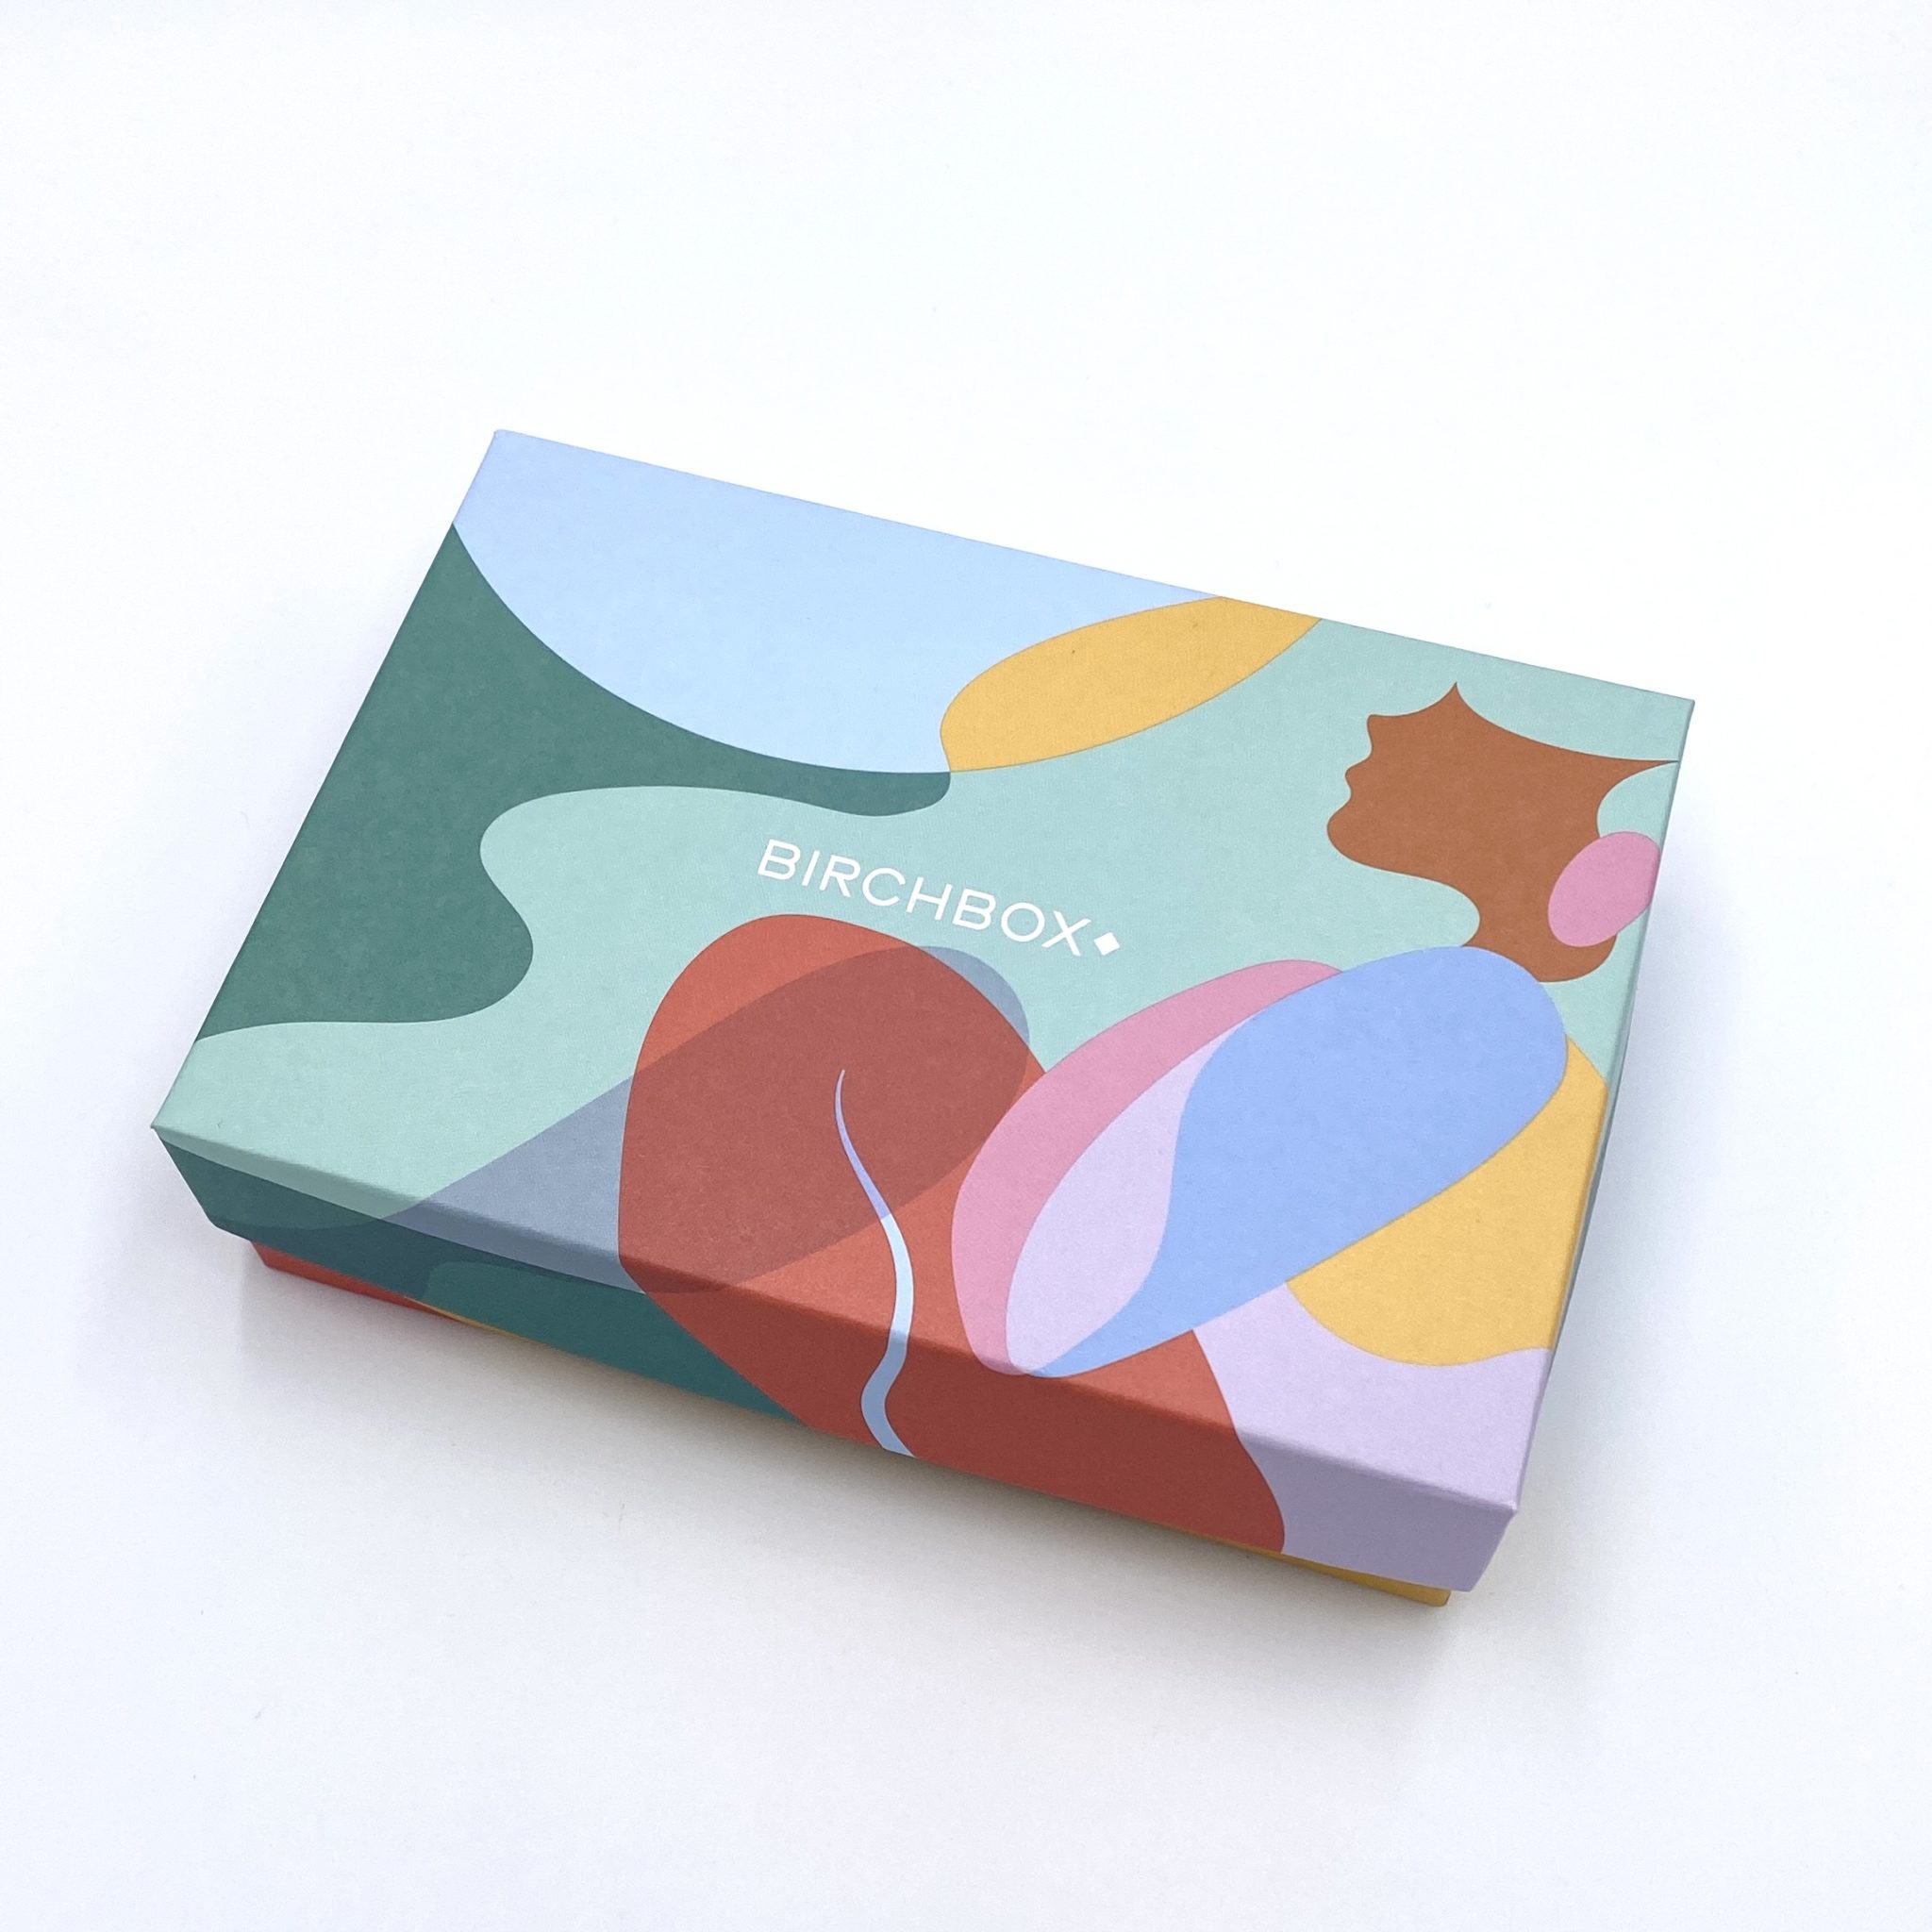 Birchbox Coupon – FREE Extra Birchbox or Free Gift With Subscription